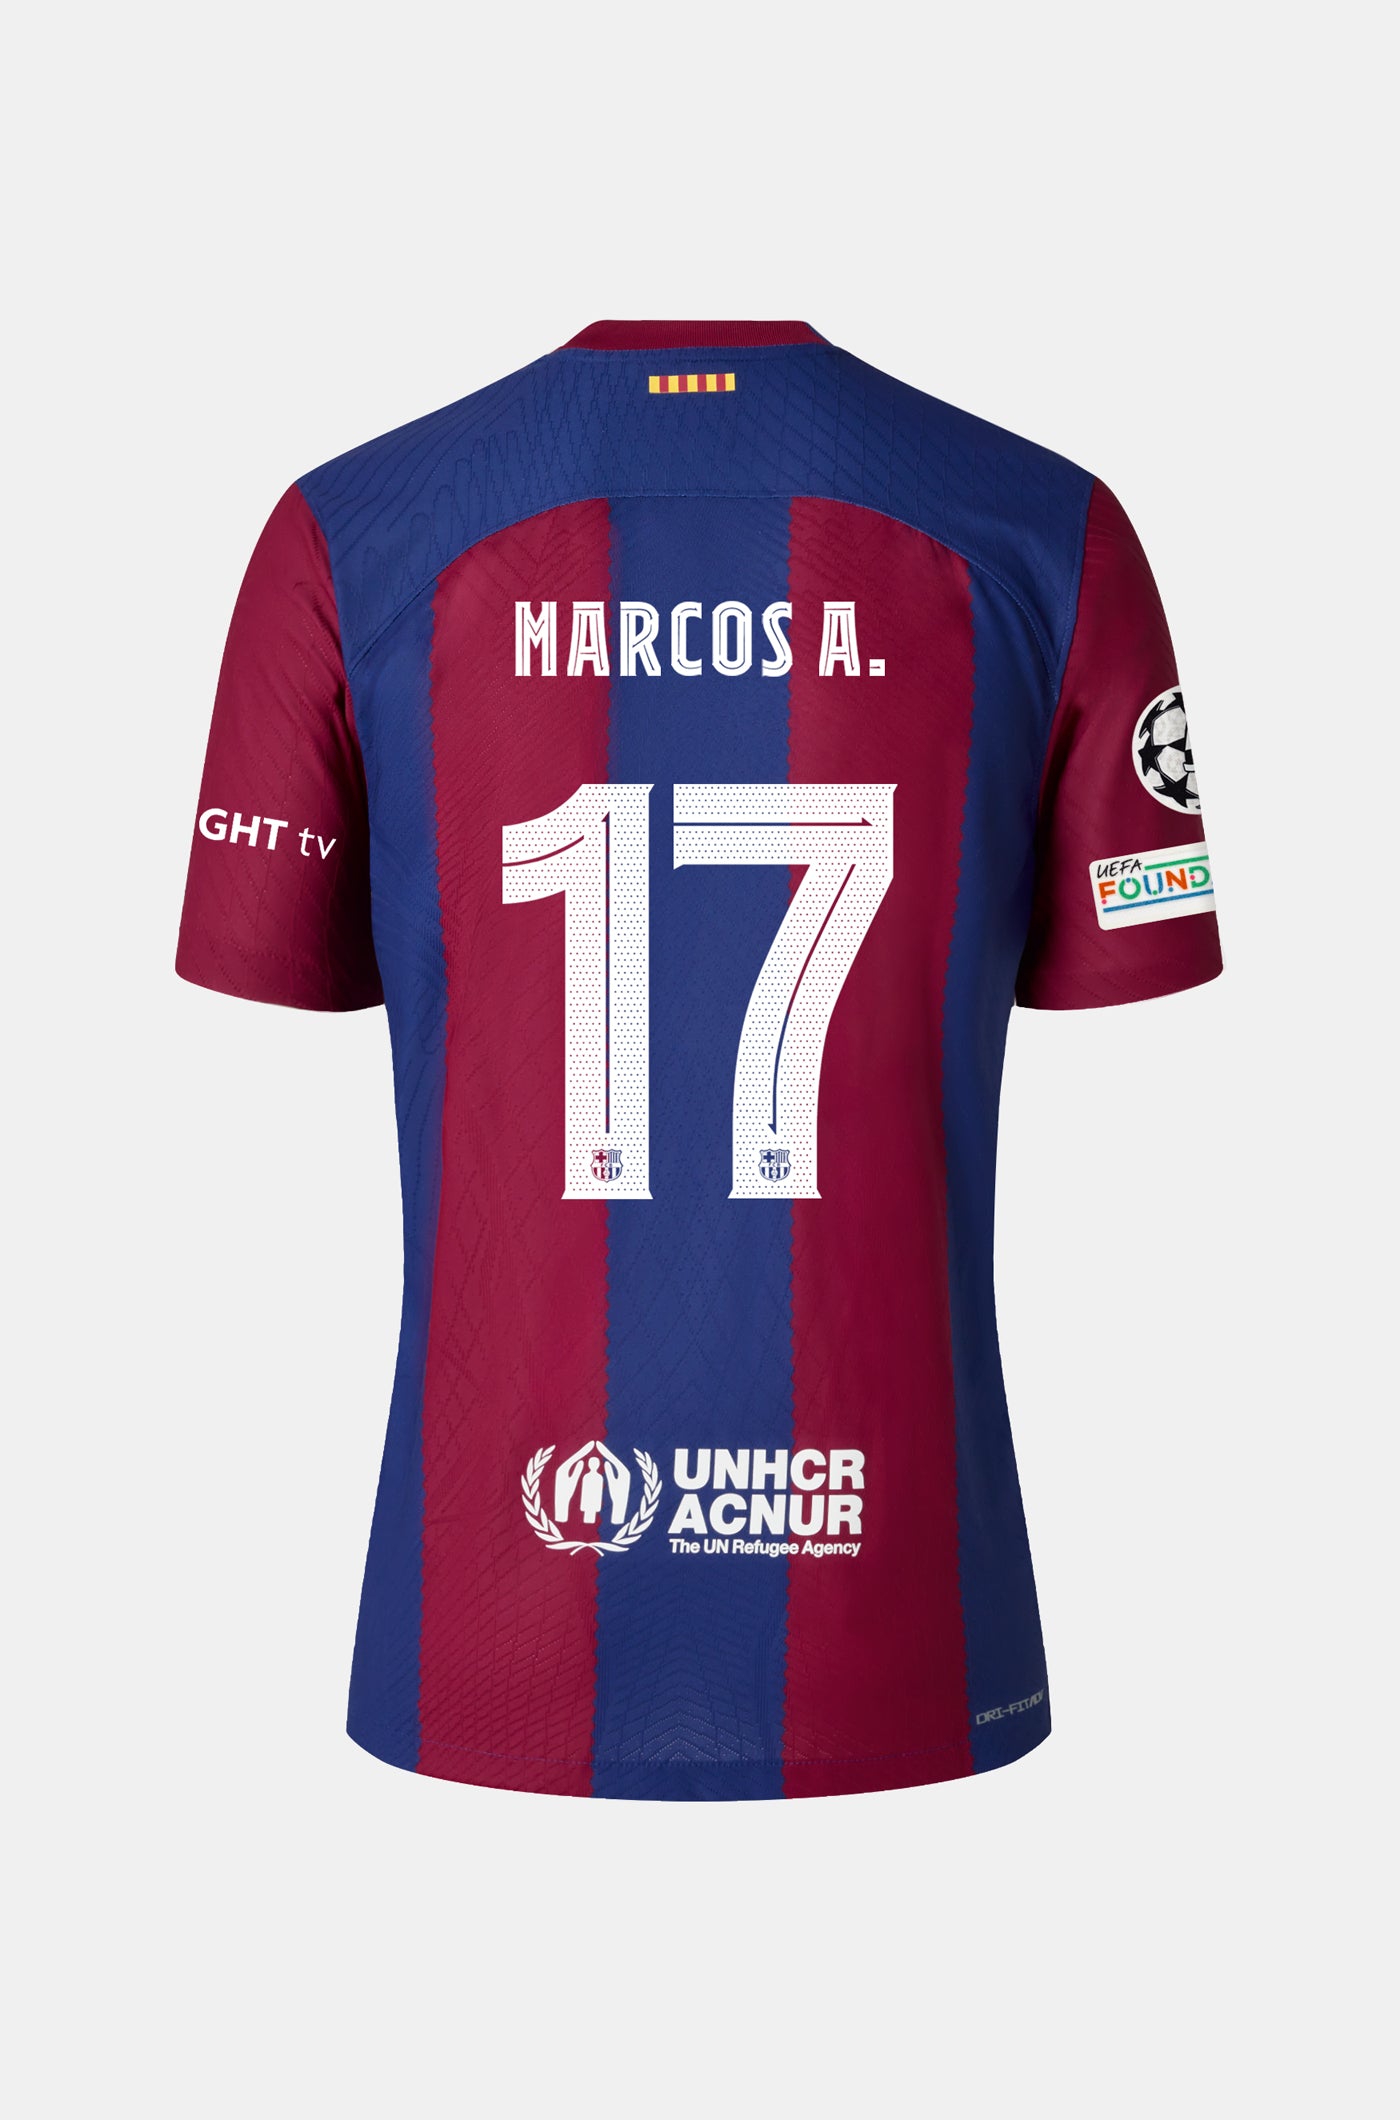 UCL FC Barcelona home shirt 23/24 Player's Edition  - MARCOS A.